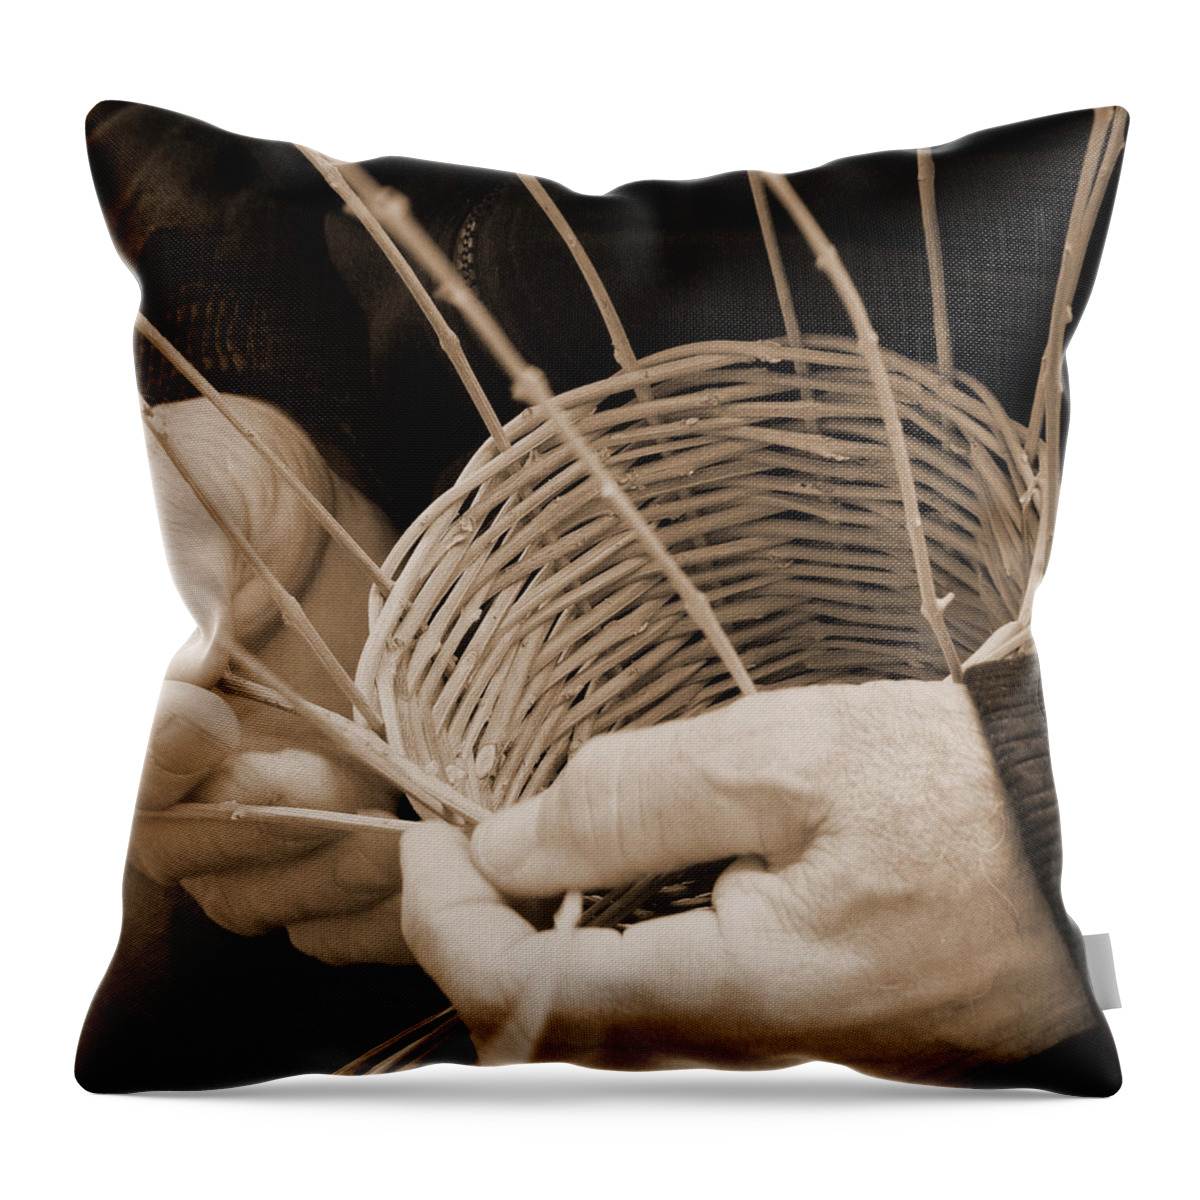 Sepia Throw Pillow featuring the photograph The Basket Weaver by Marcia Socolik